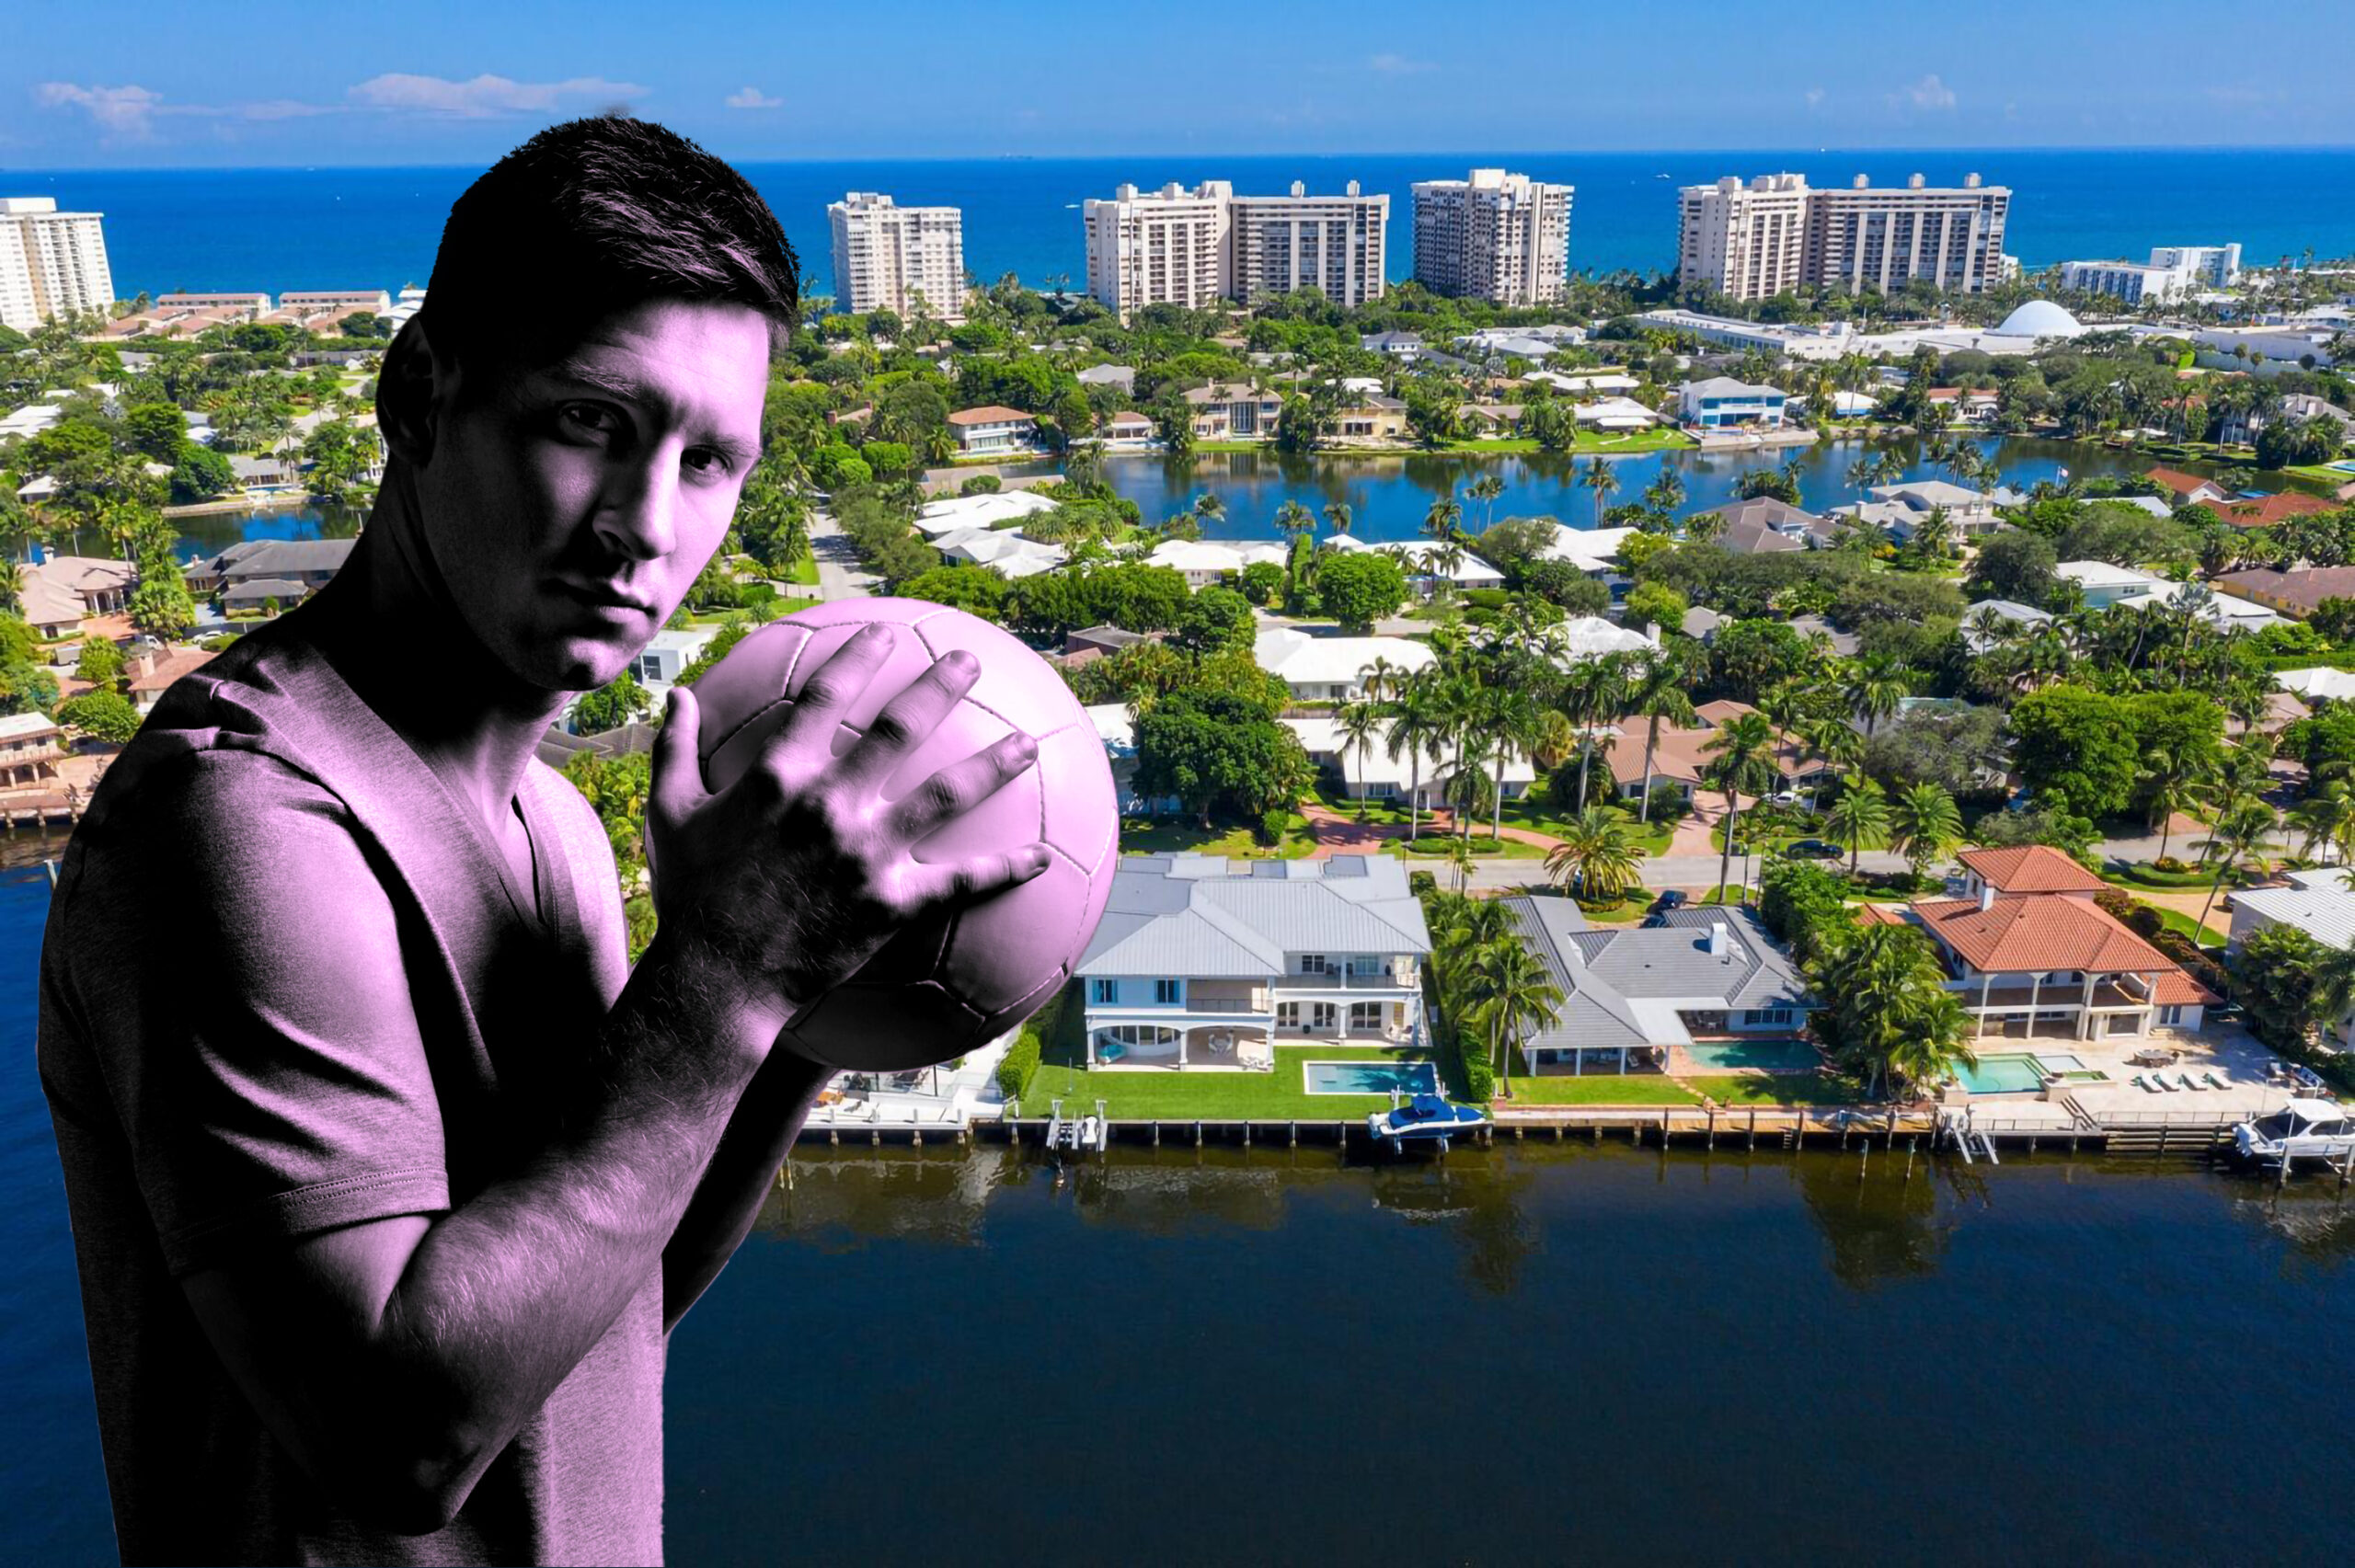 Messi’s Potential South Florida Residence: A Glimpse into His Possible New Home